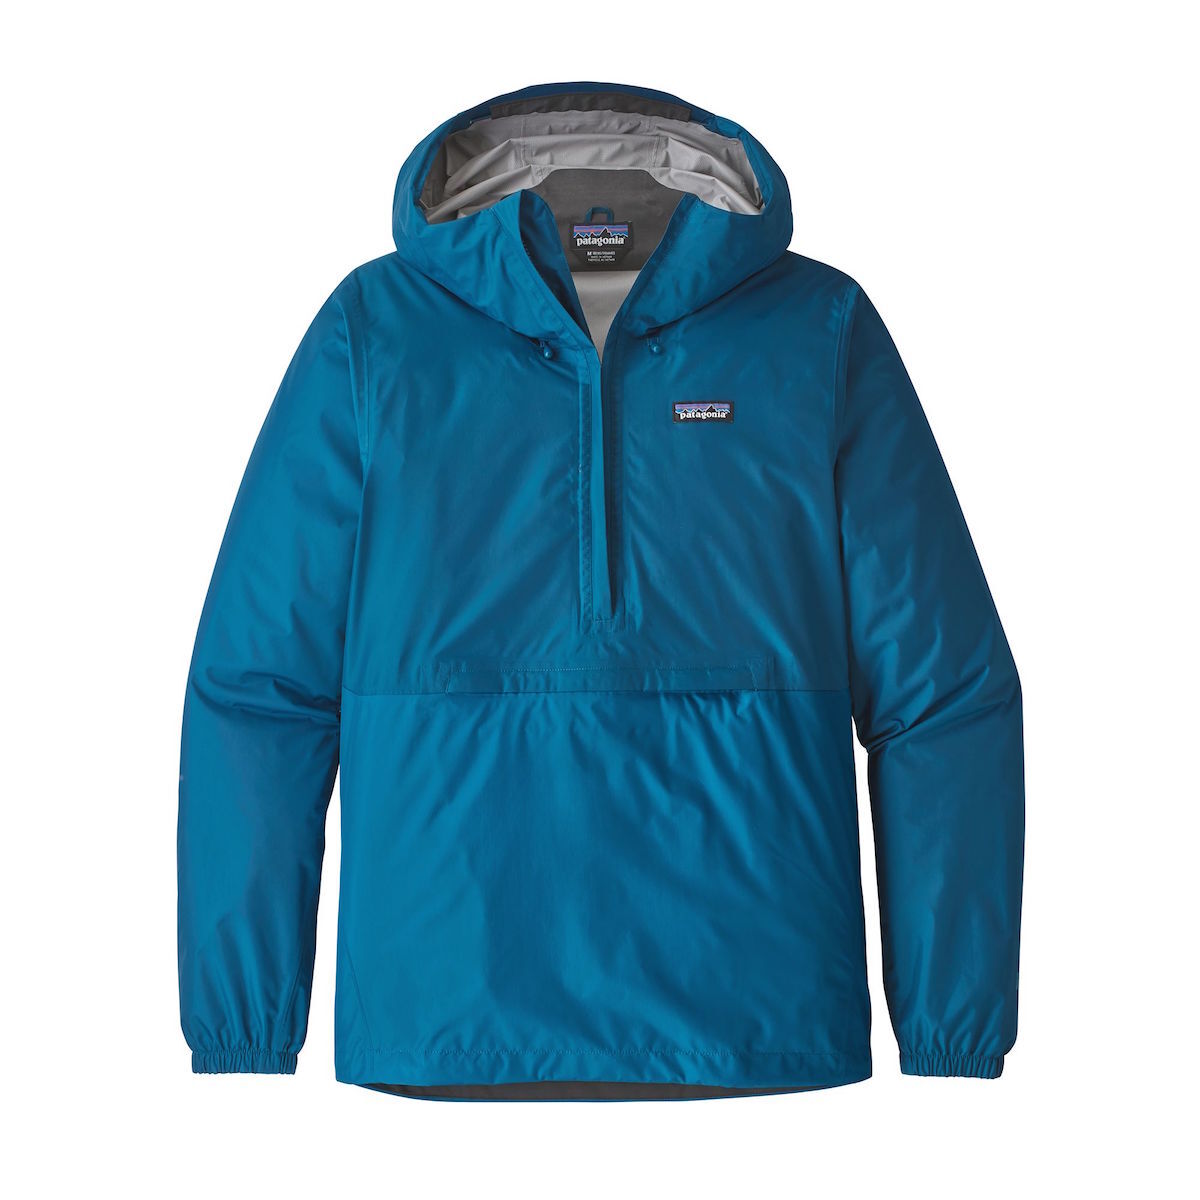 Patagonia - Torrentshell Pullover - Chaqueta impermeable - Hombre